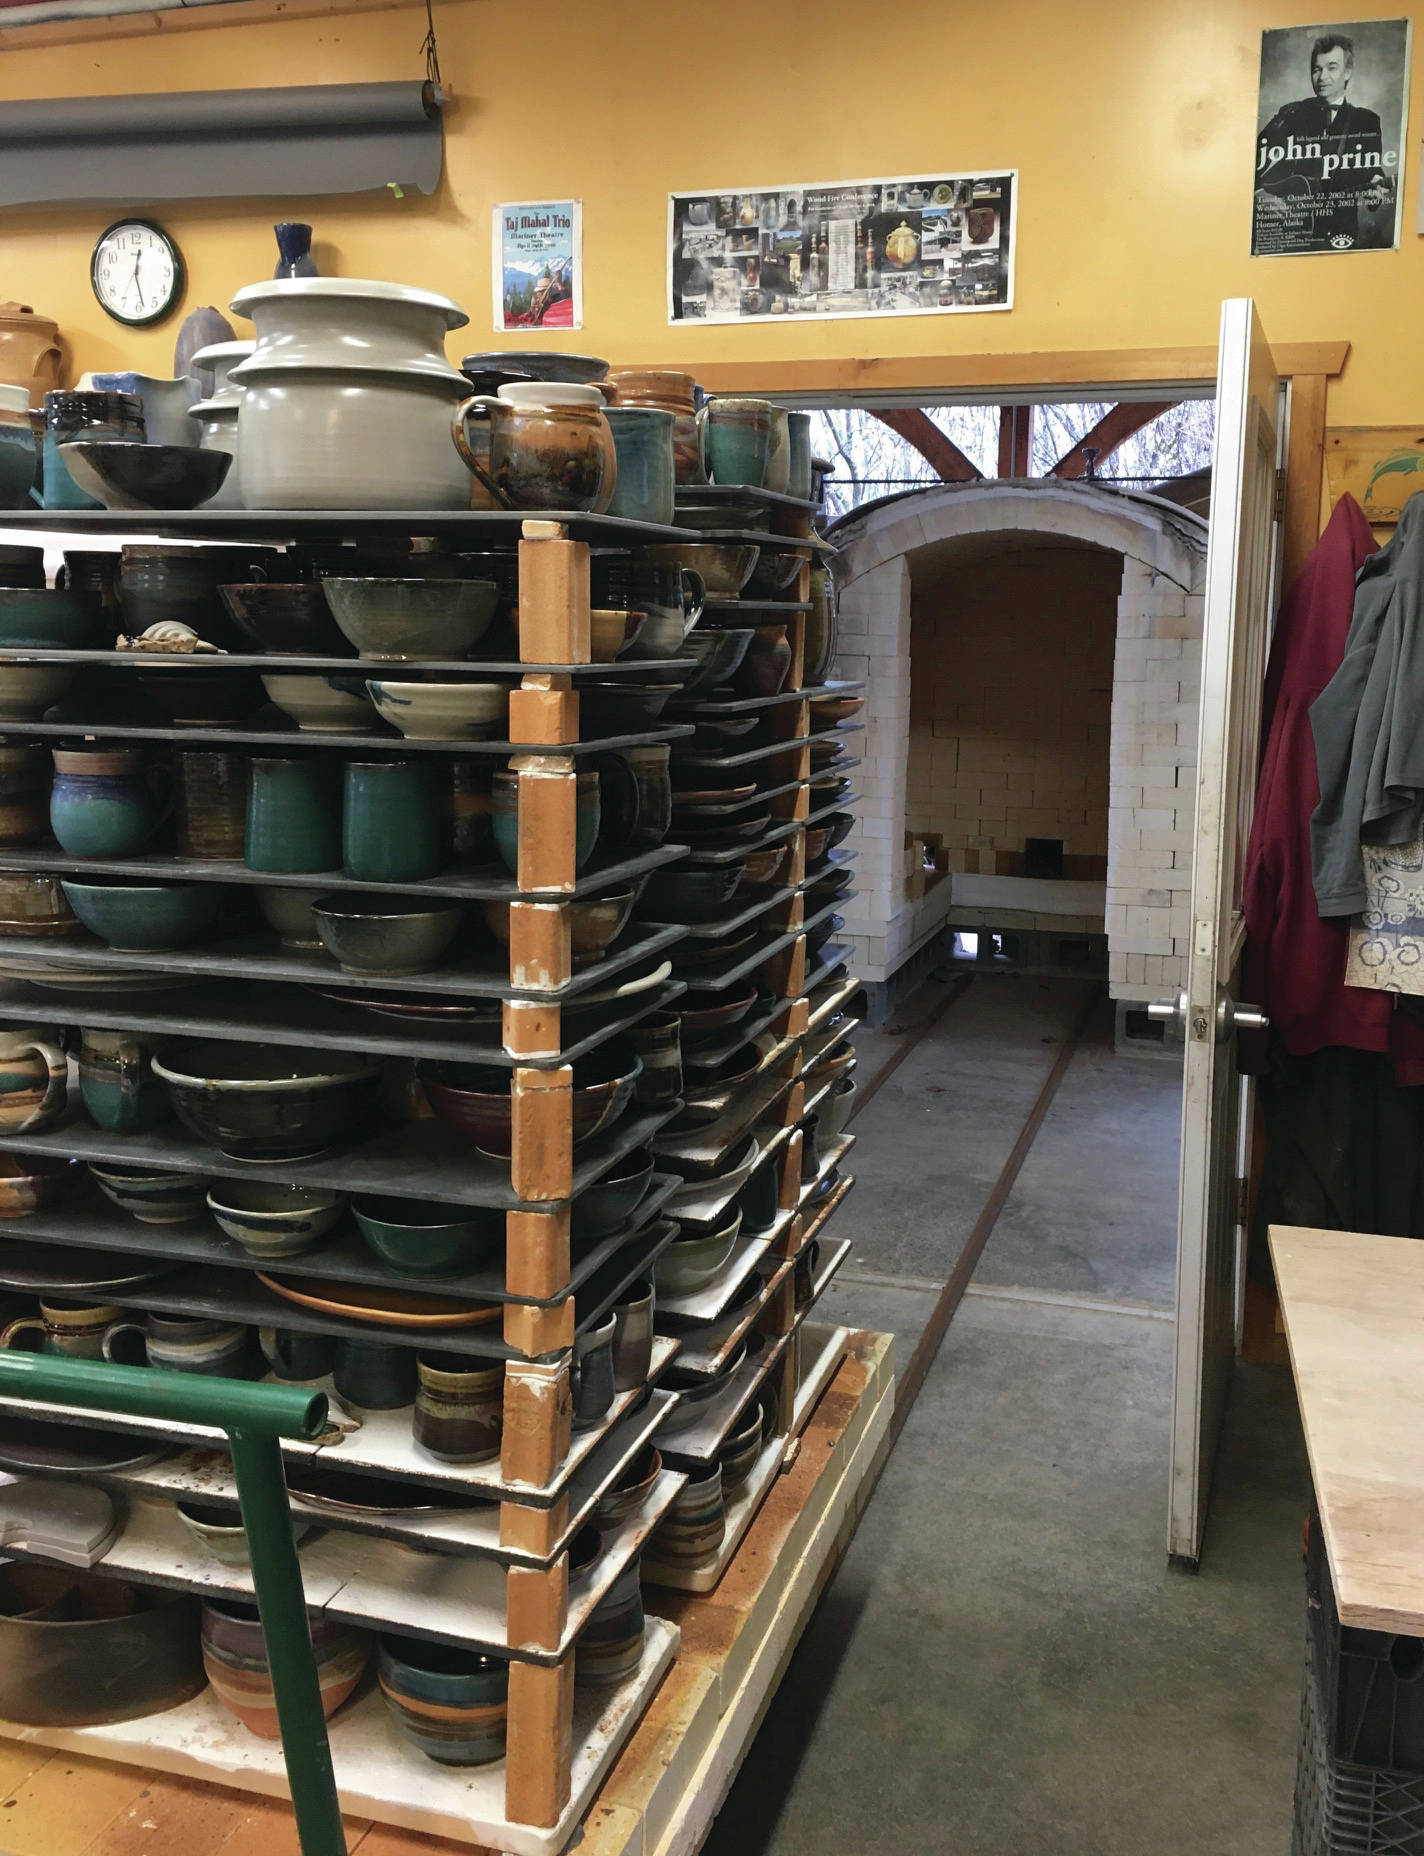 Glaze-fired work was wheeled out of Paul Dungan’s car kiln on Nov. 12, 2020, at his studio in Homer, Alaska. (Photo by Paul Dungan)